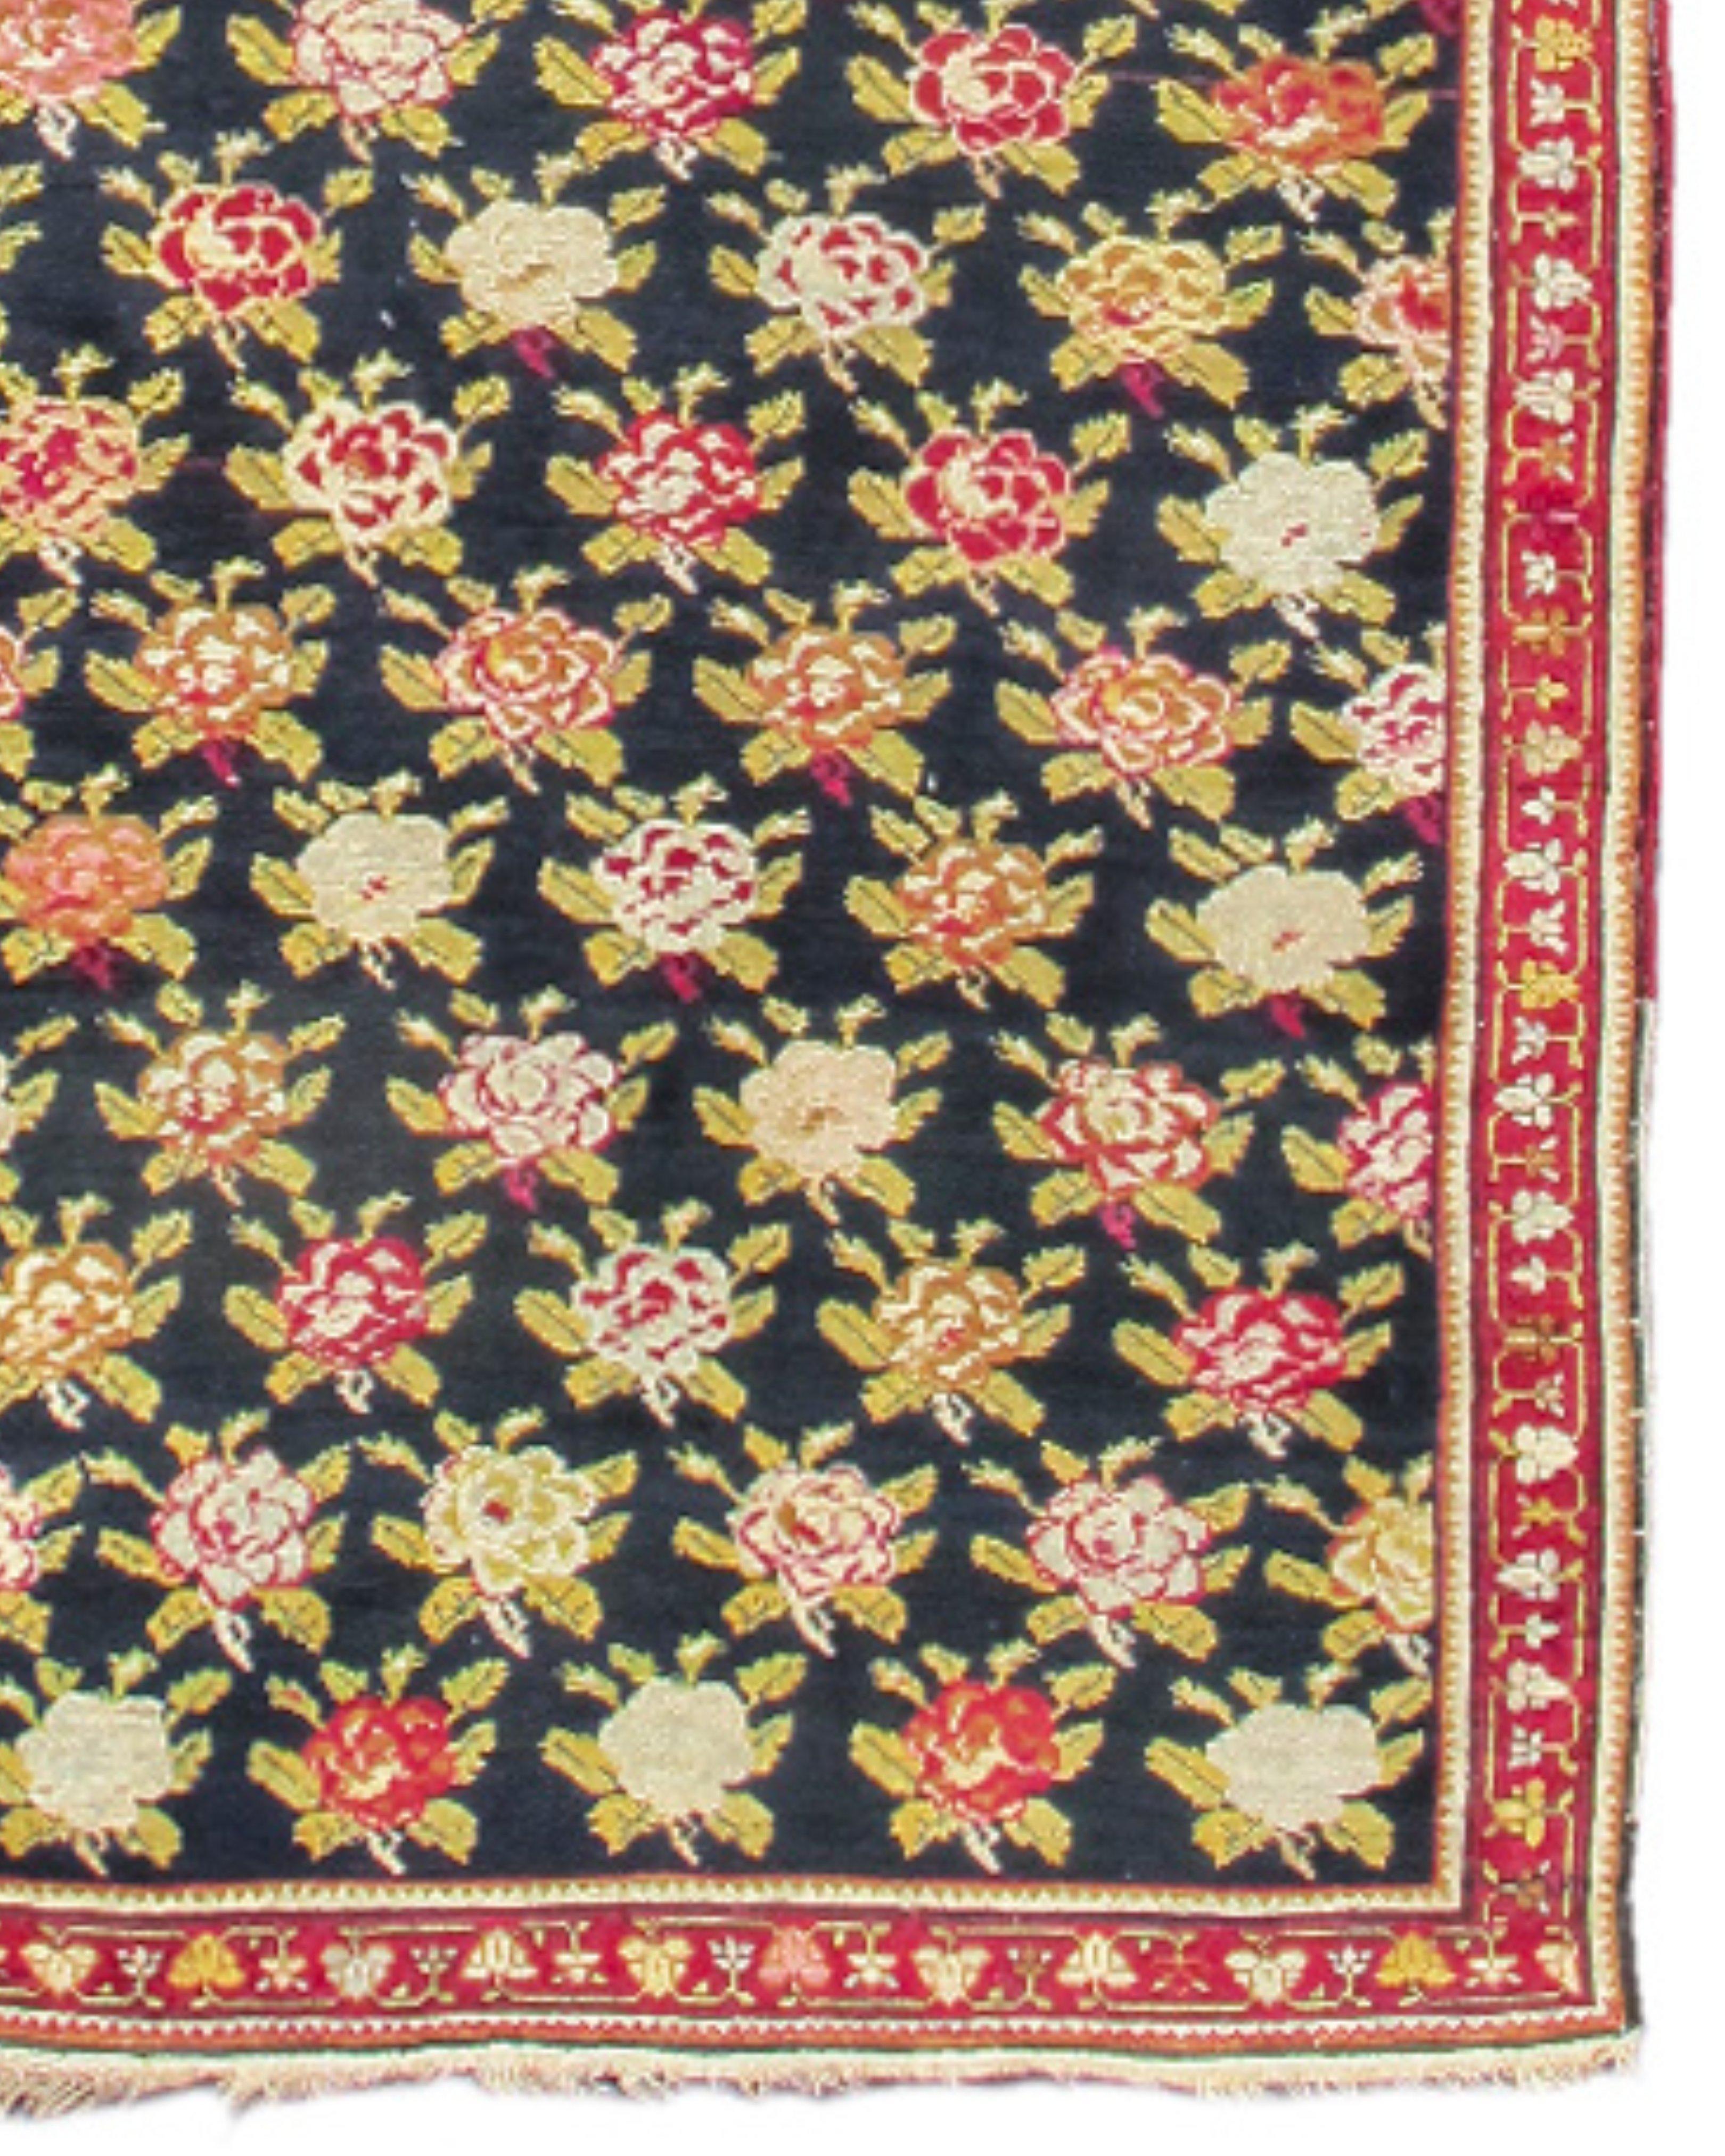 Antique Karabagh Runner, 19th Century In Excellent Condition For Sale In San Francisco, CA